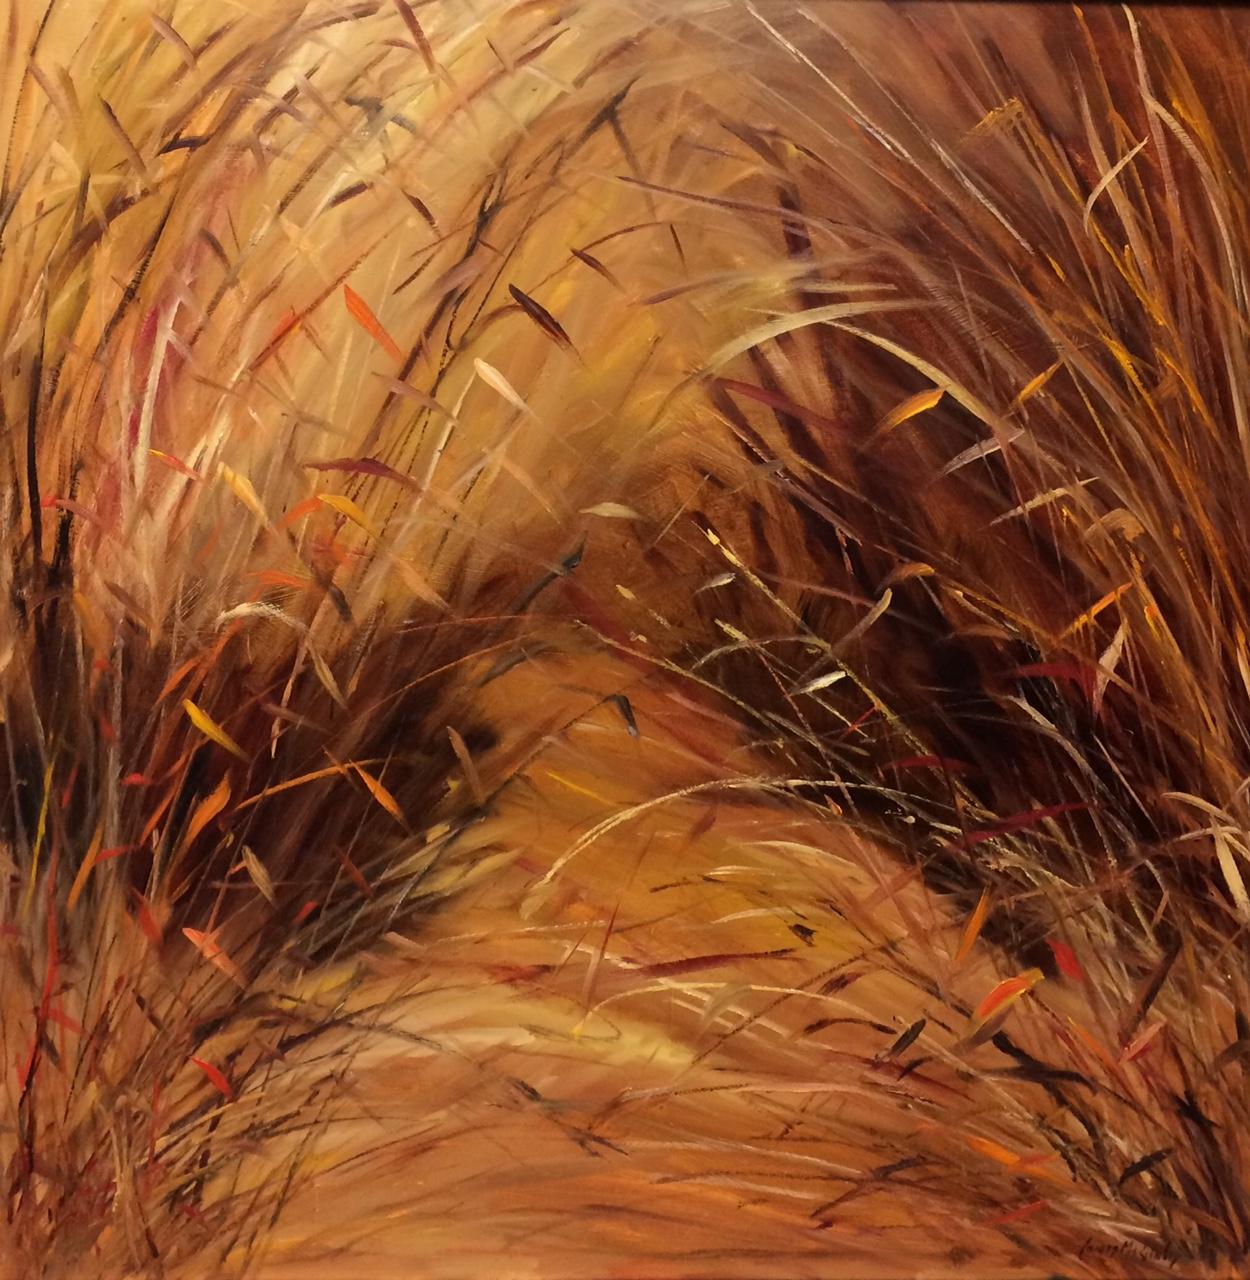 Grain in Fall, original 36x36 contemporary landscape - Painting by James McGinley